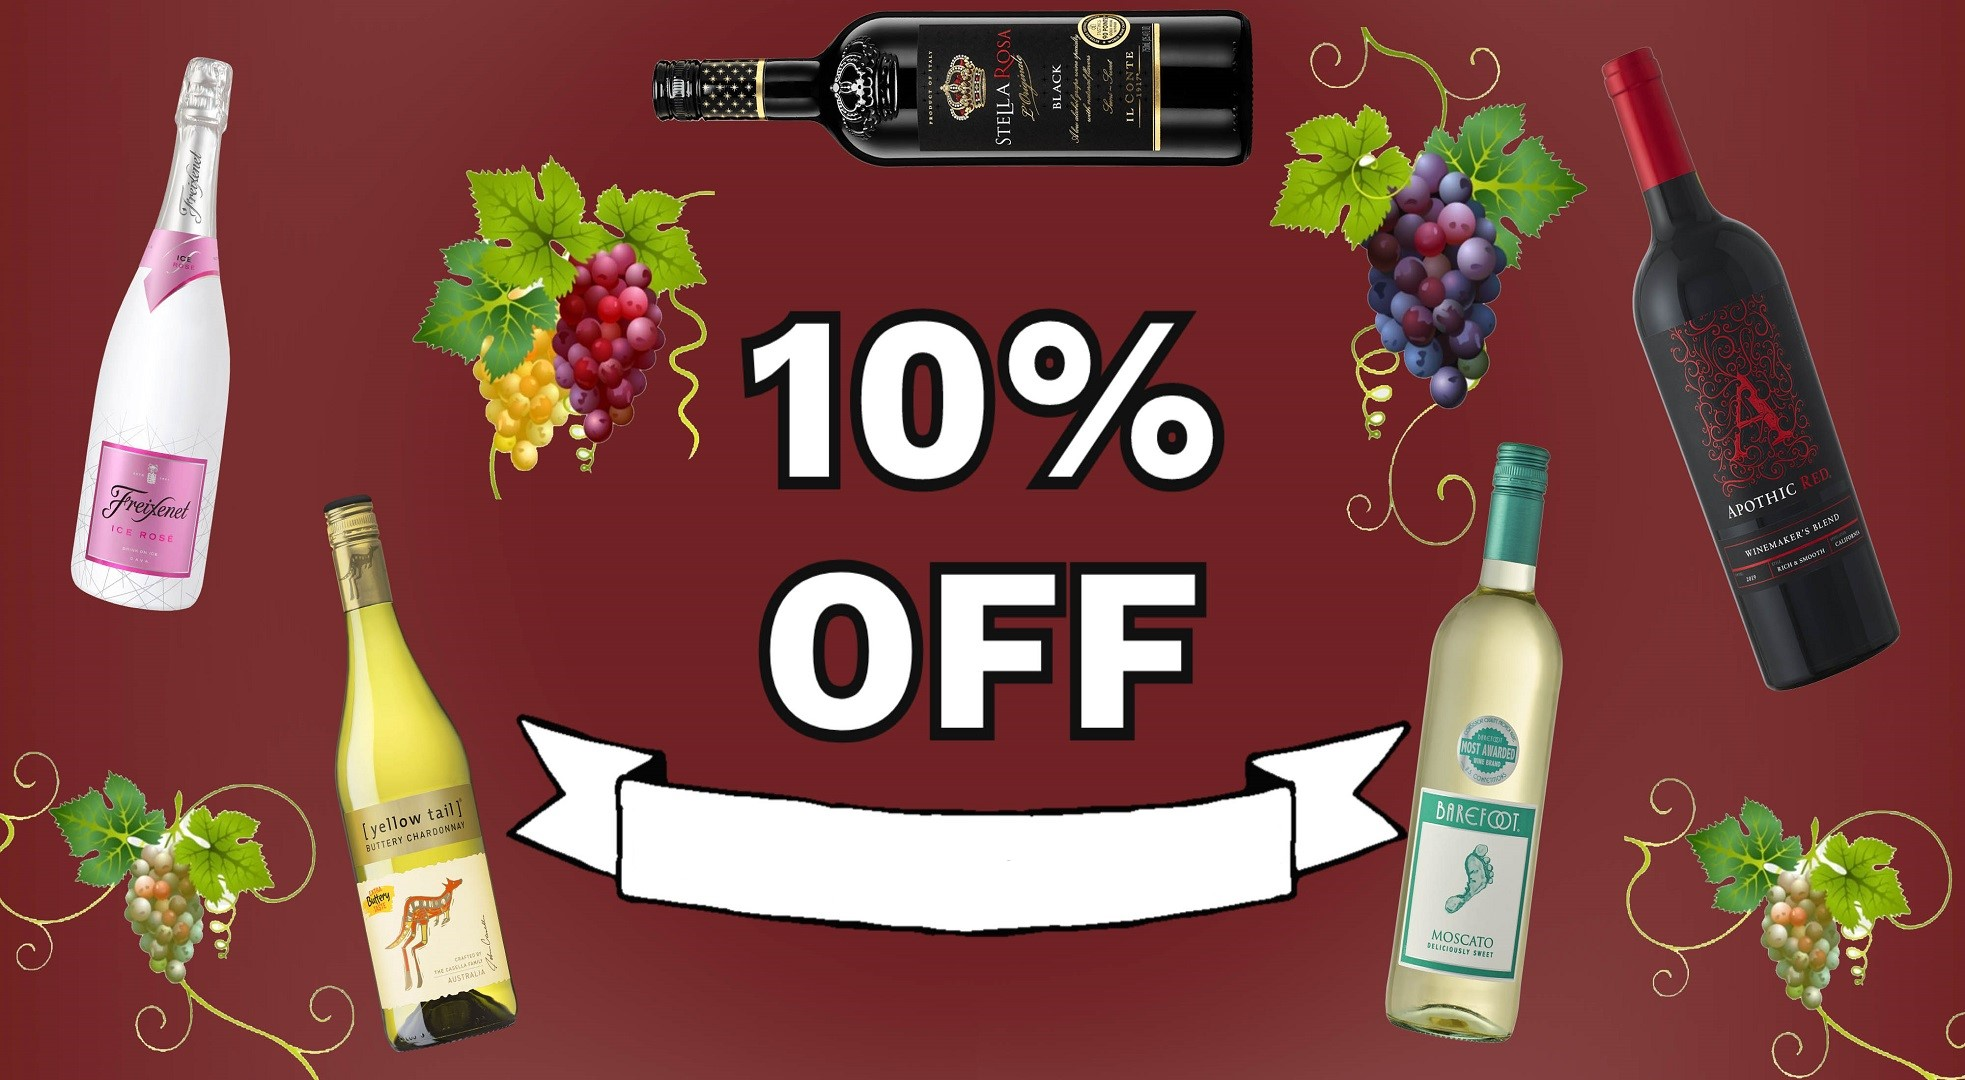 10% OFF $100 OR MORE SPENT ON WINE